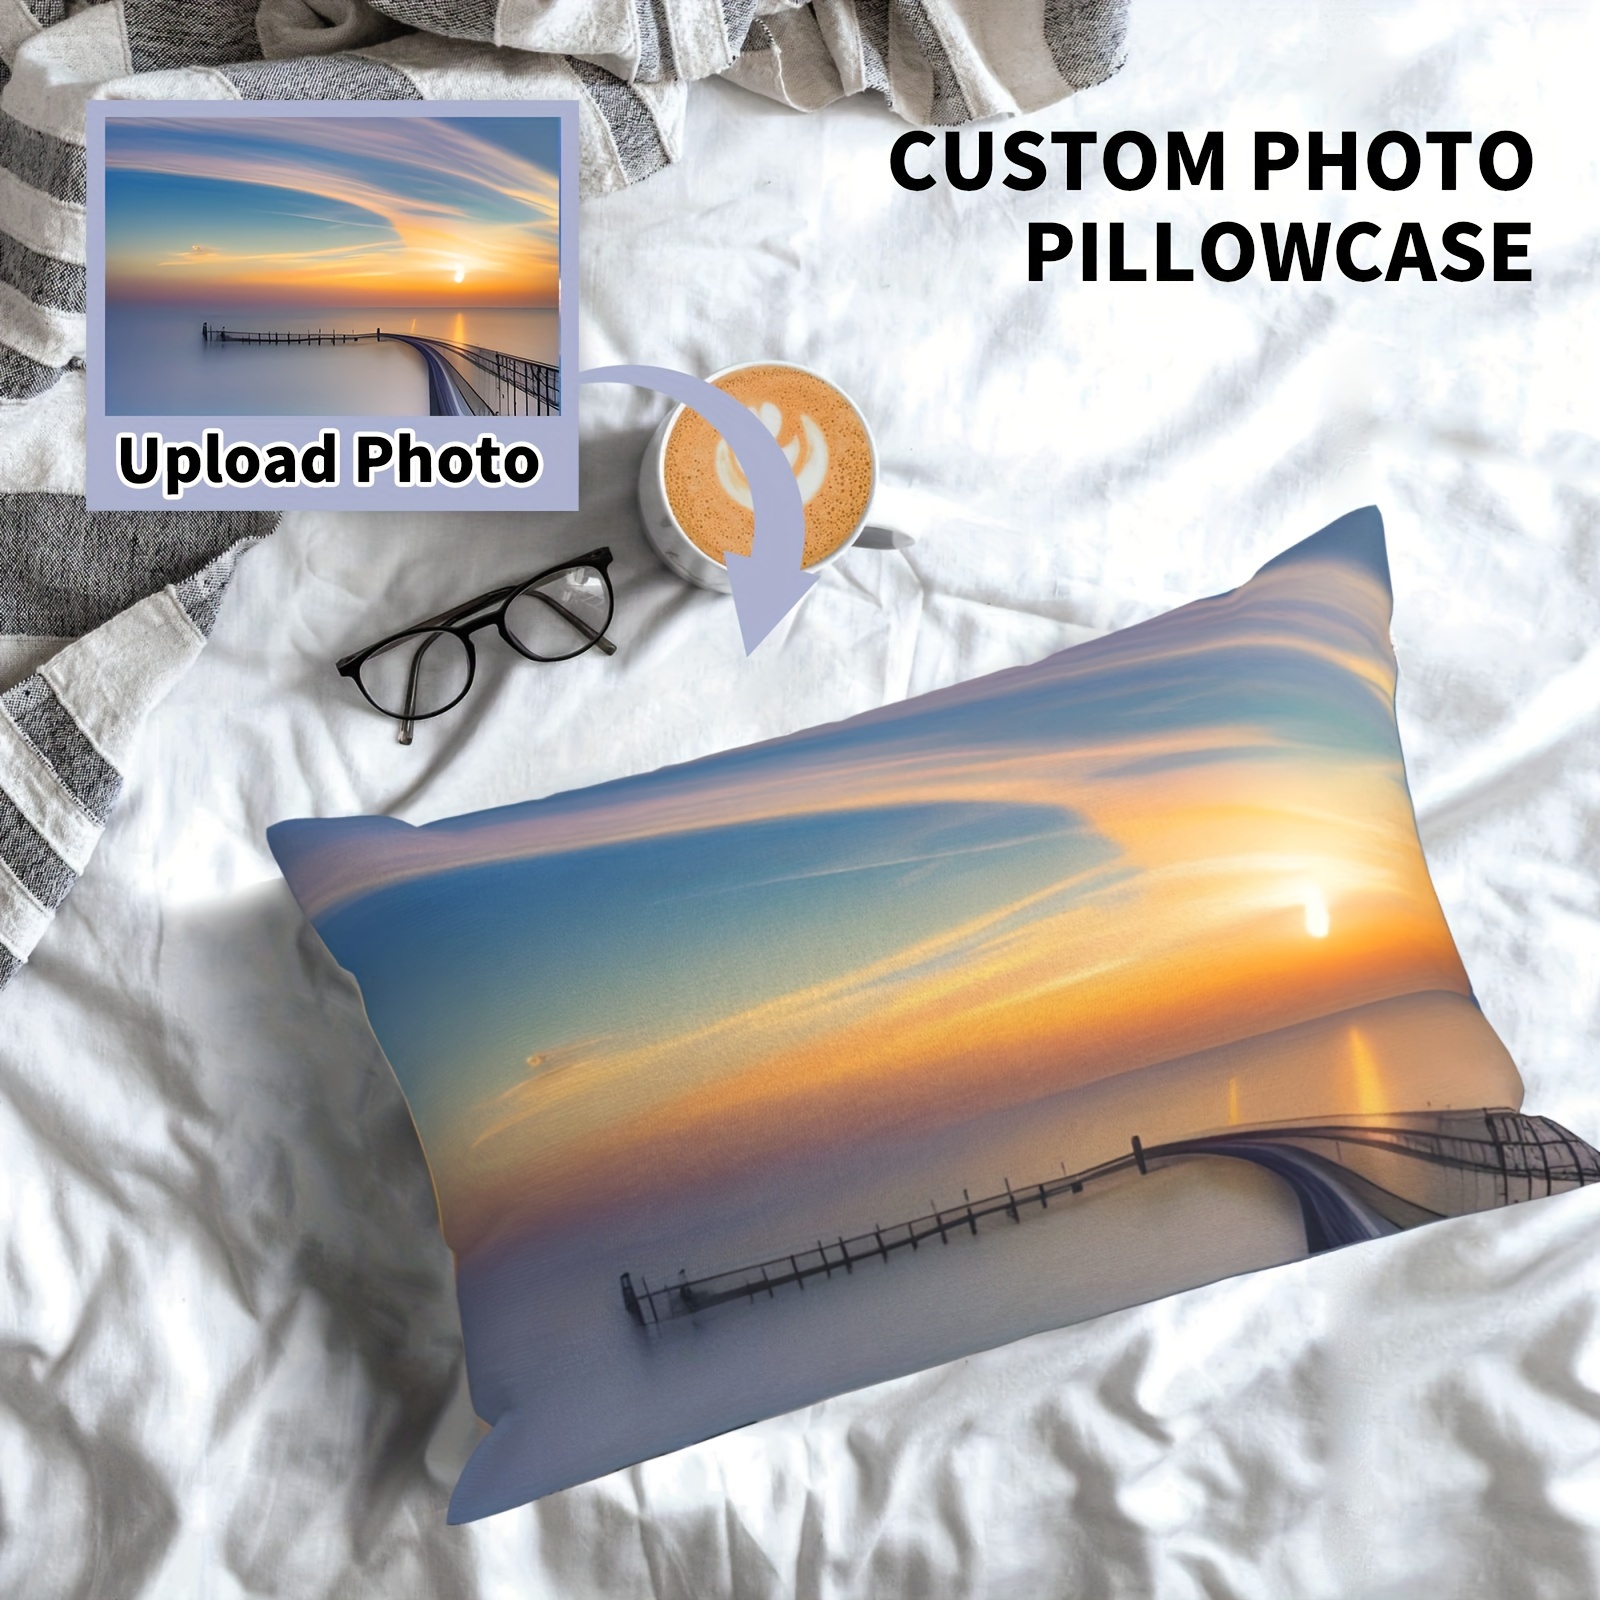 

Personalized Photo Pillowcase - Double-sided, Soft Polyester, Zip Closure - Perfect For Mother's Day, Anniversaries, Graduations & More - Machine Washable Home Decor (pillow Not Included)